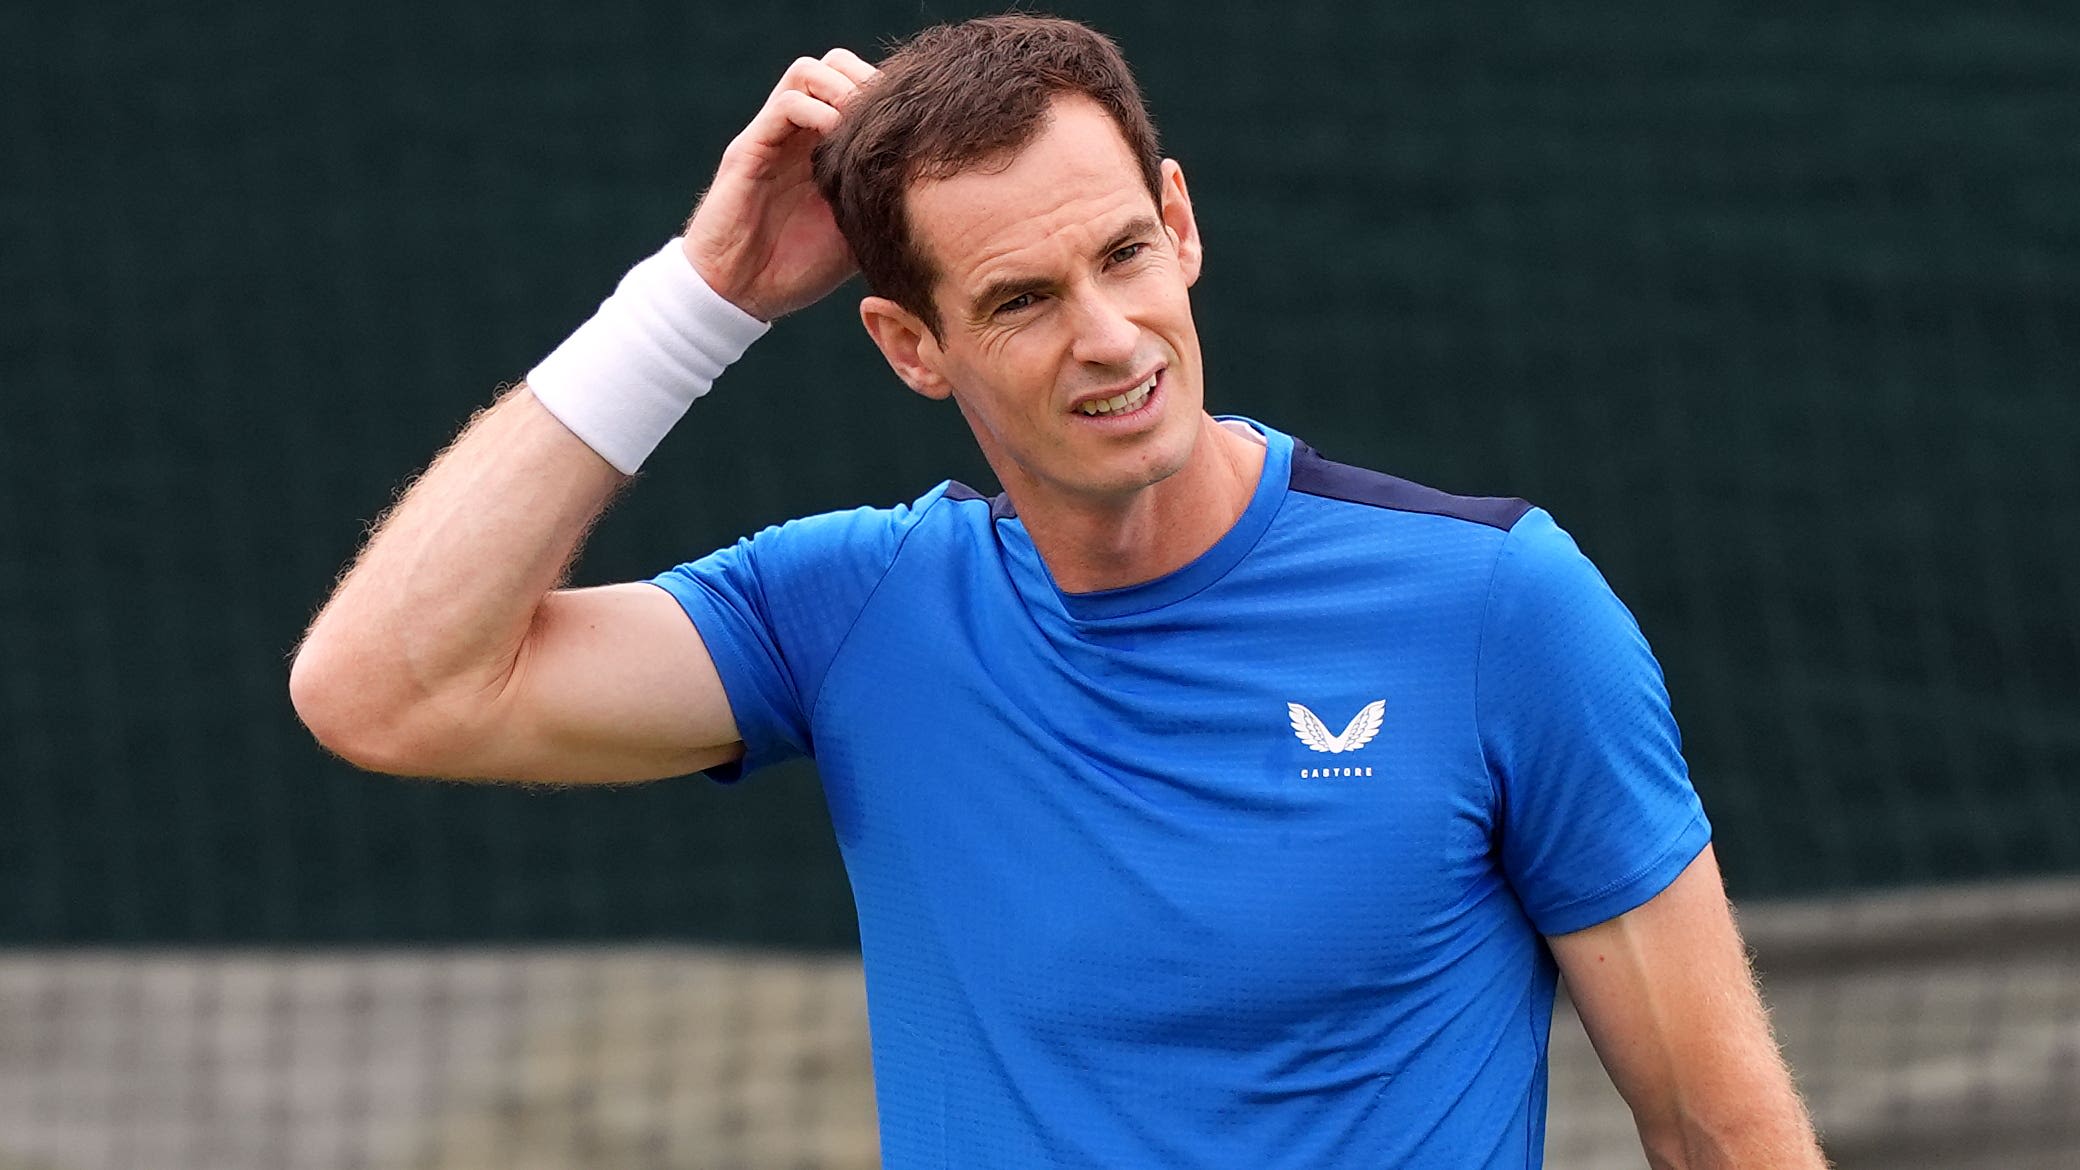 Andy Murray disappointed after ‘incredible’ effort to be fit comes up short